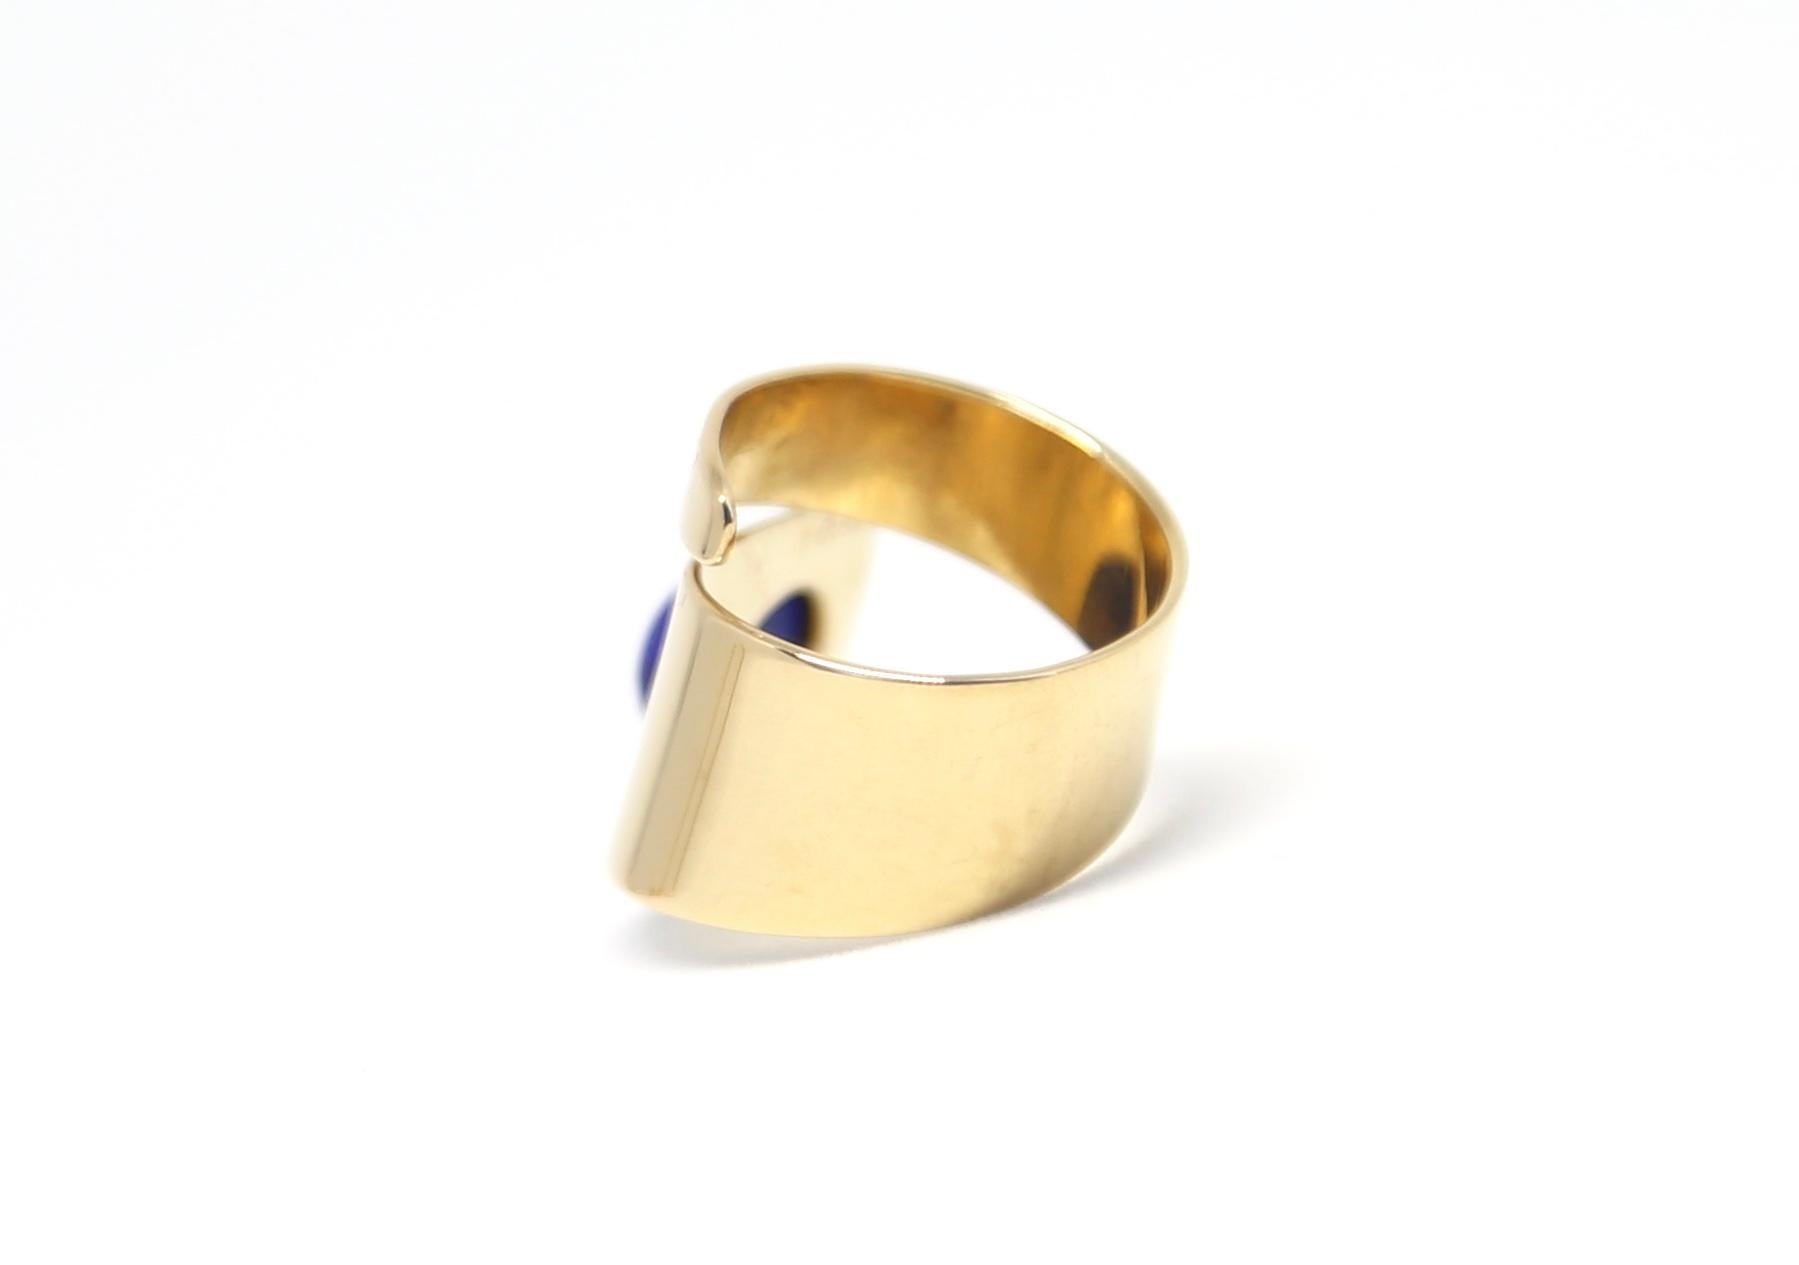 Very rare, 18k yellow gold & lapis lazuli modernist ring designed by Jean Dinh Van for Cartier dating to the 1960's.  Currently the ring best fits a US size 5.5 or 6 however can be adjusted slightly by a jeweler. Marked 'Cartier', 'Dinh Van' and